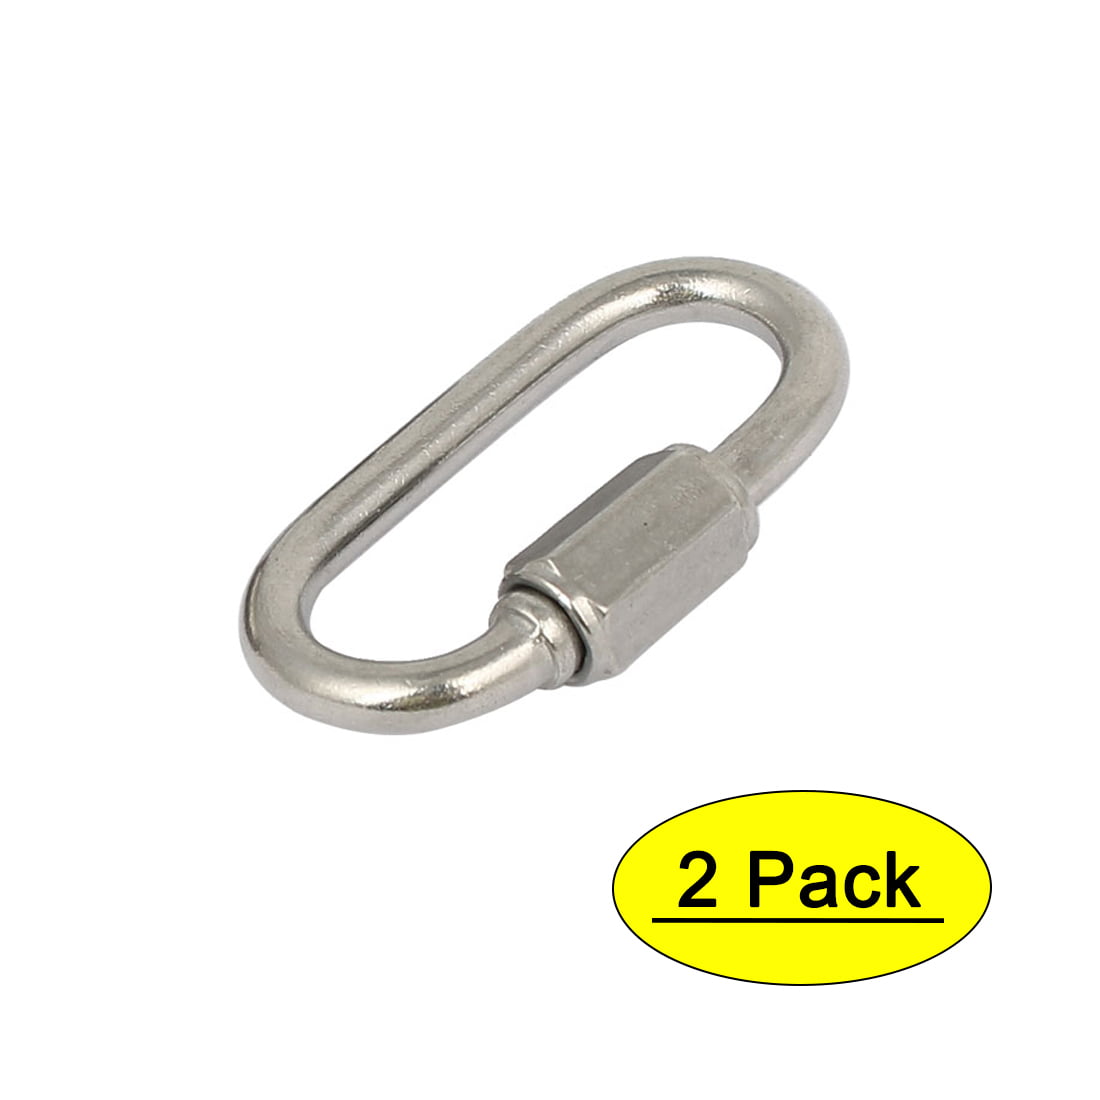 ZINC BZP COATED BIKE SHED GATE 10mm HEAVY DUTY THICK WELDED SECURITY CHAIN 